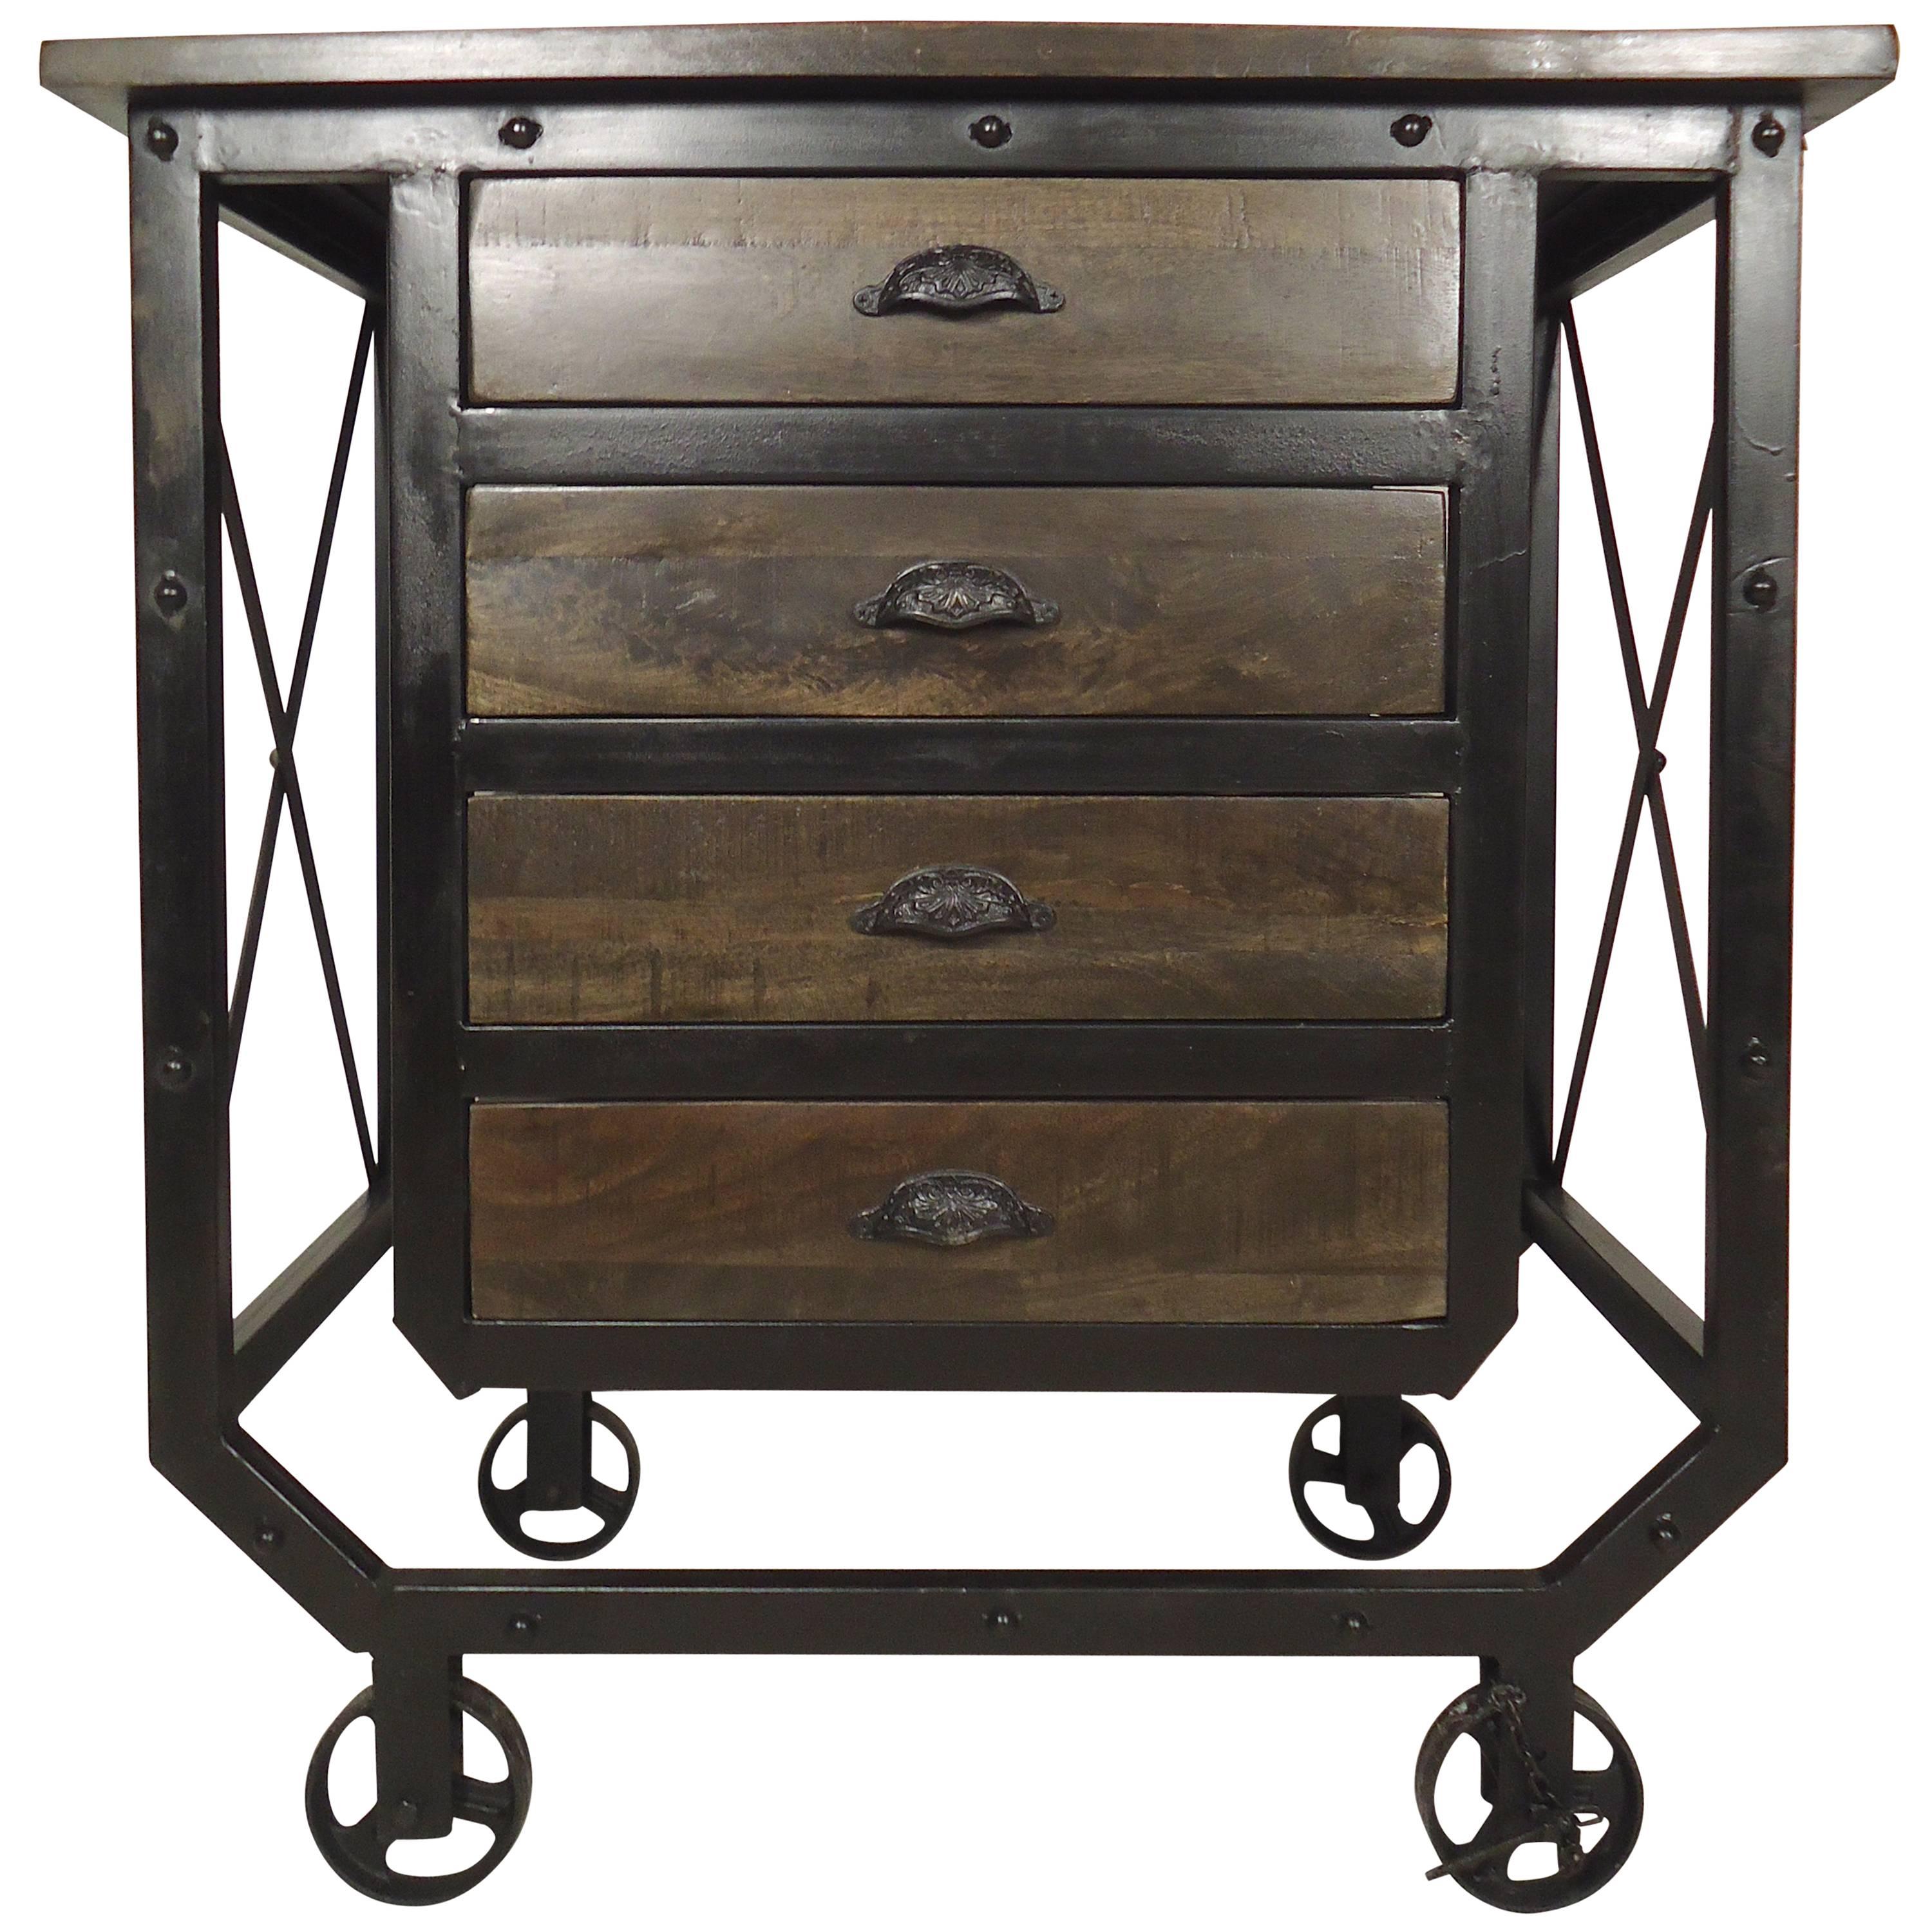 Industrial Style Rolling Cart